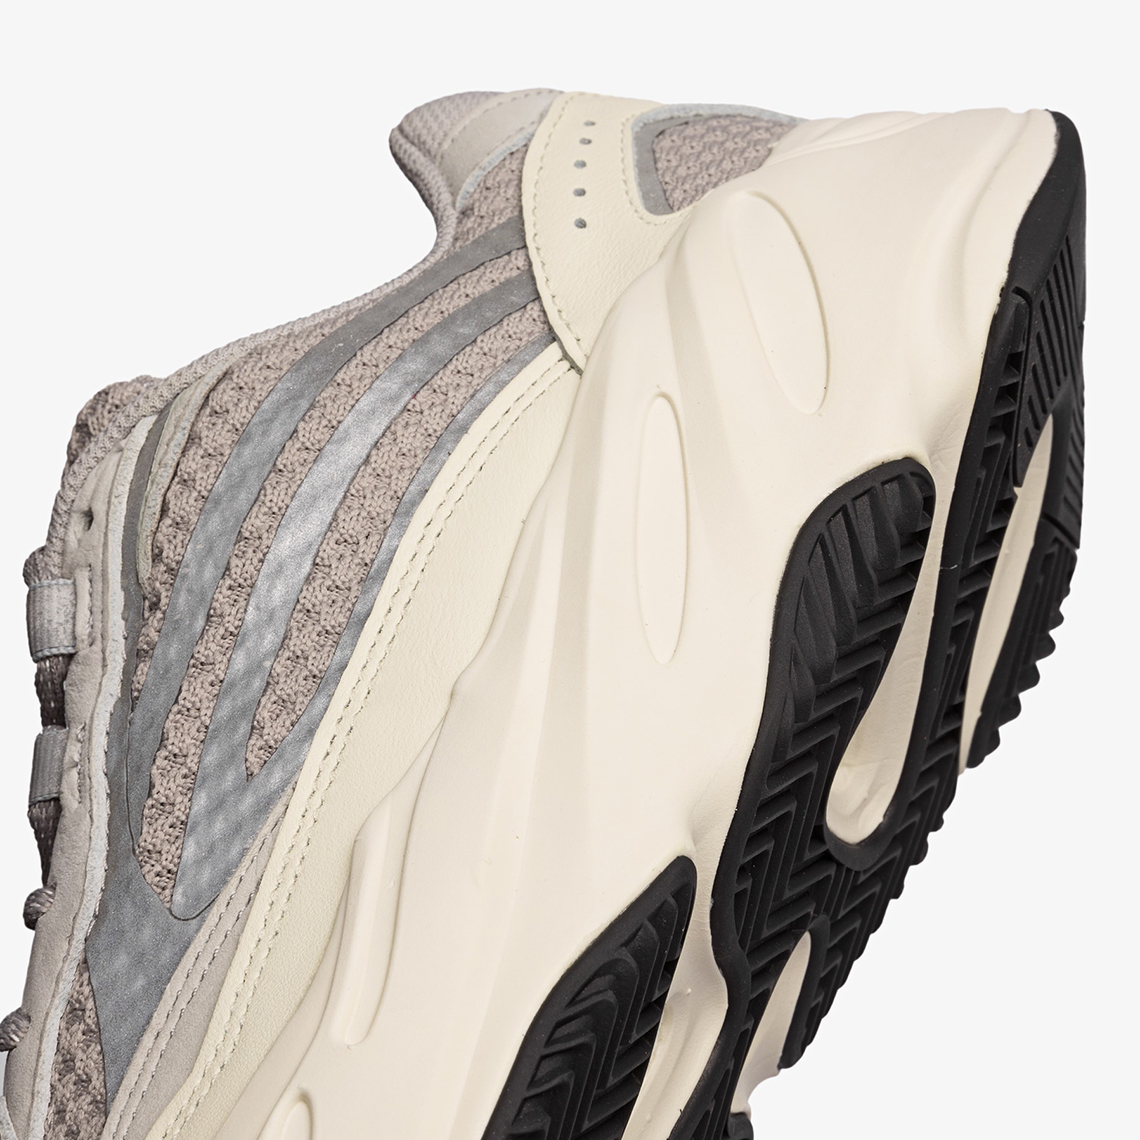 adidas Yeezy Boost 700 v2 Static Release Reminder 2